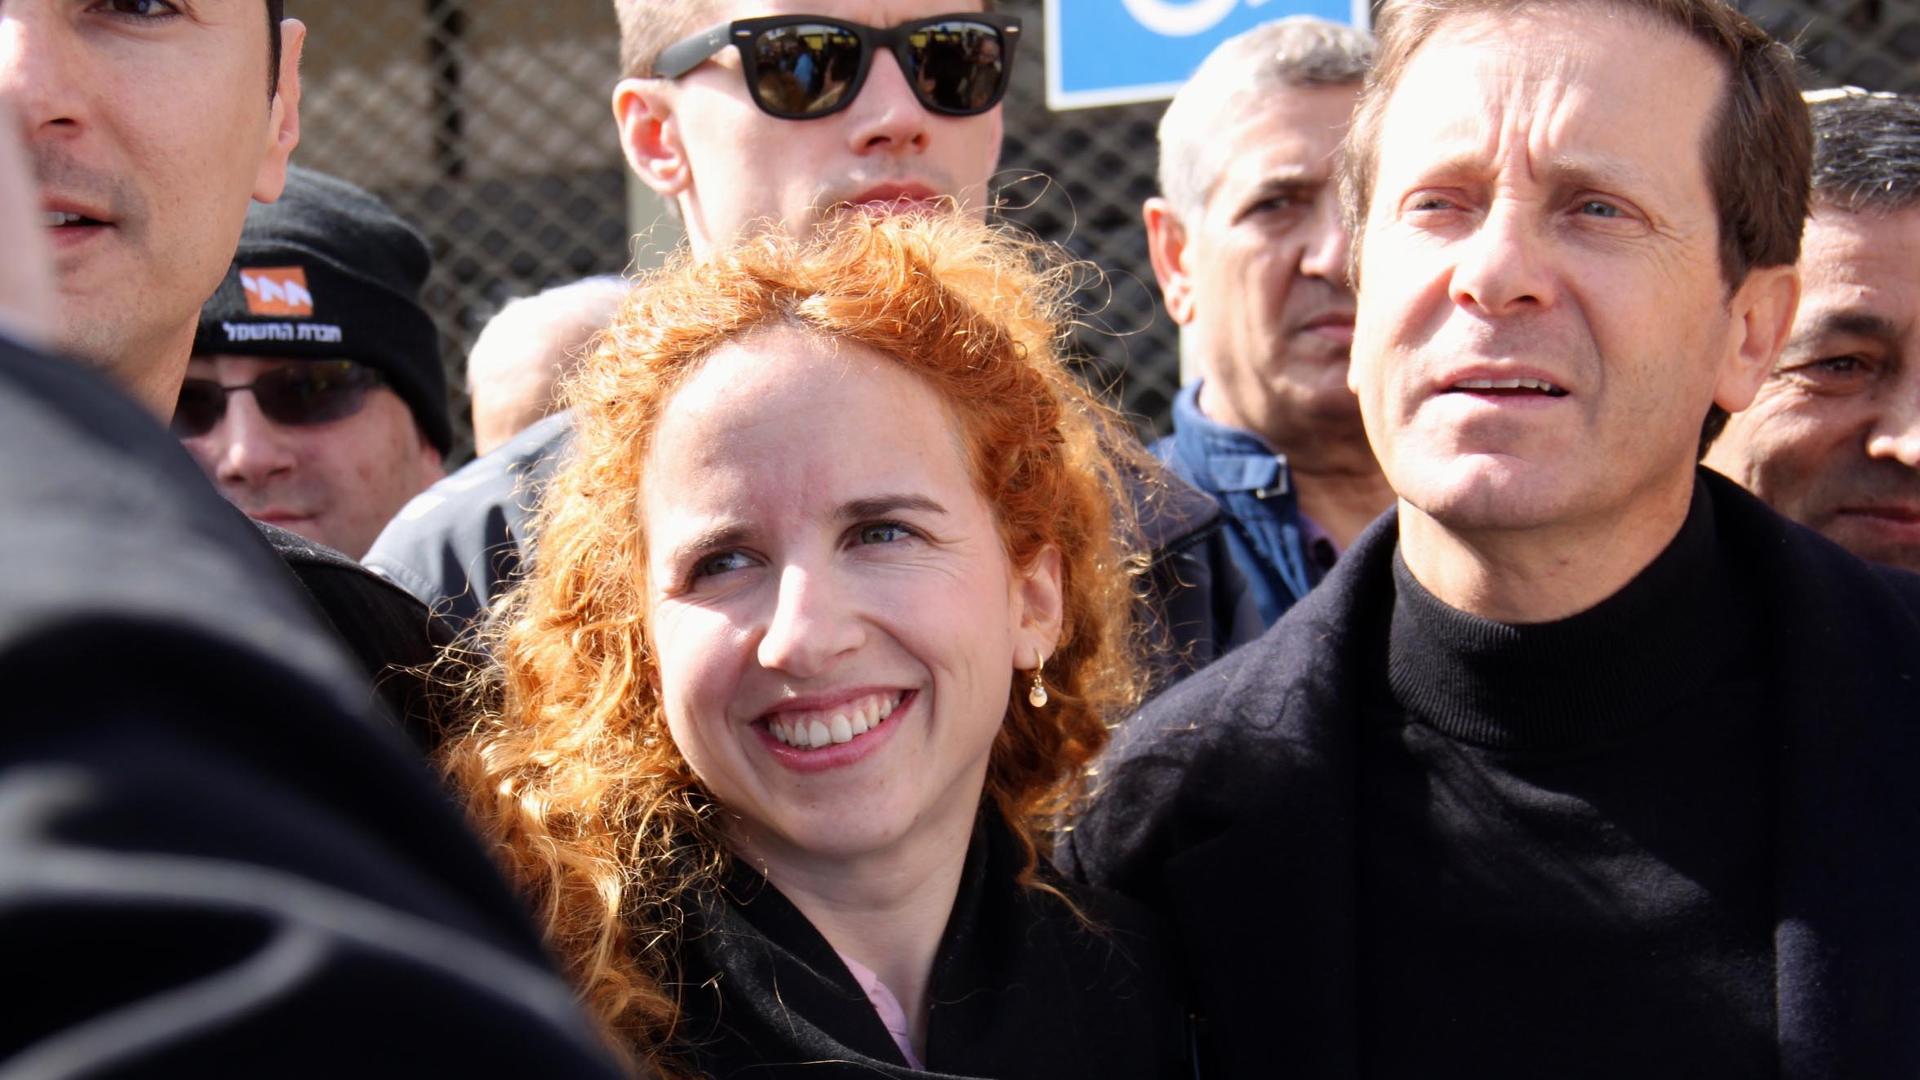 Firebrand Israeli politician Stav Shaffir stands with Yitzhak Herzog, the chairman of Israel's Labor Party and fellow member of the Israeli parliament.